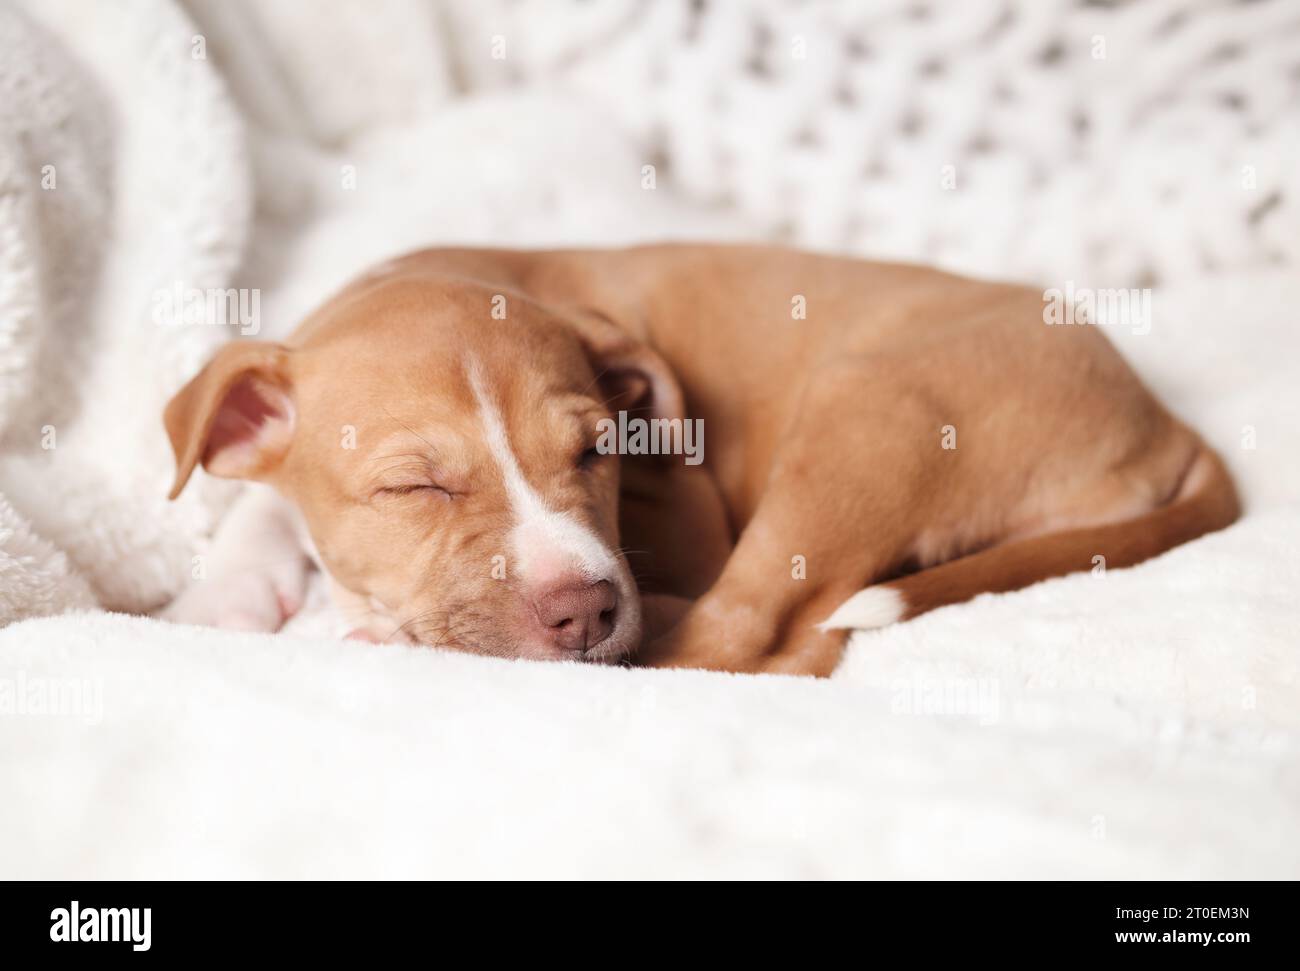 Puppy sleeping on sofa. Front view of relaxed cute puppy dog lying curled up on a soft white fluffy blanket. 8 weeks old, female Boxer mix breed just Stock Photo